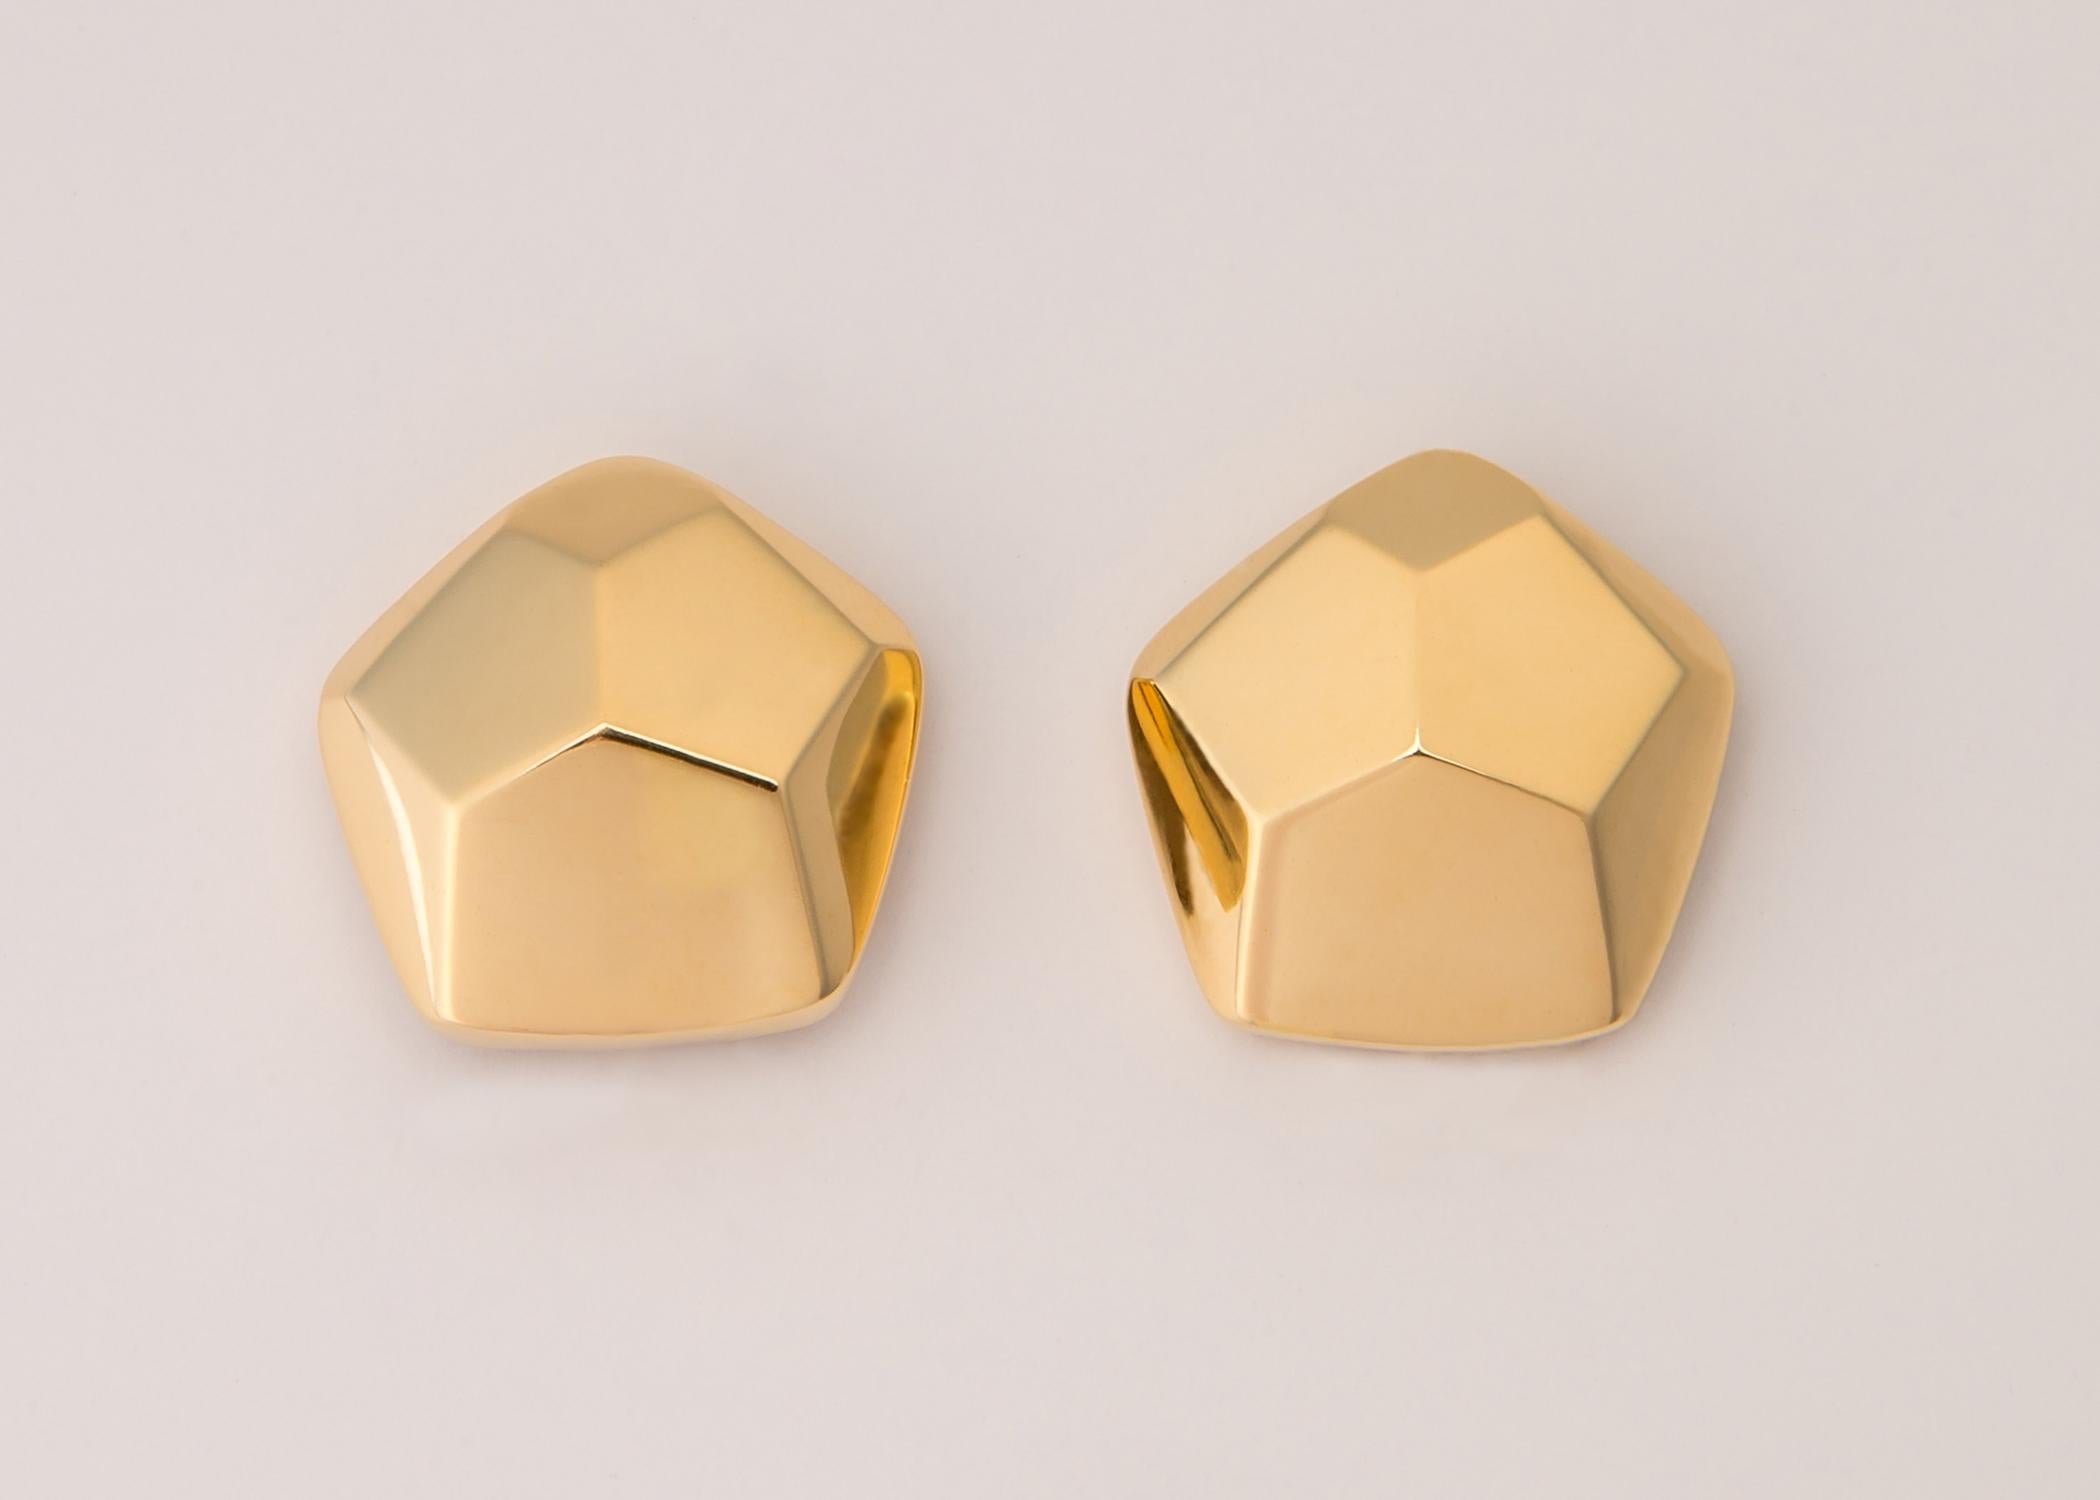 Tiffany & Co. Gold Modernist Earrings In Excellent Condition For Sale In Atlanta, GA